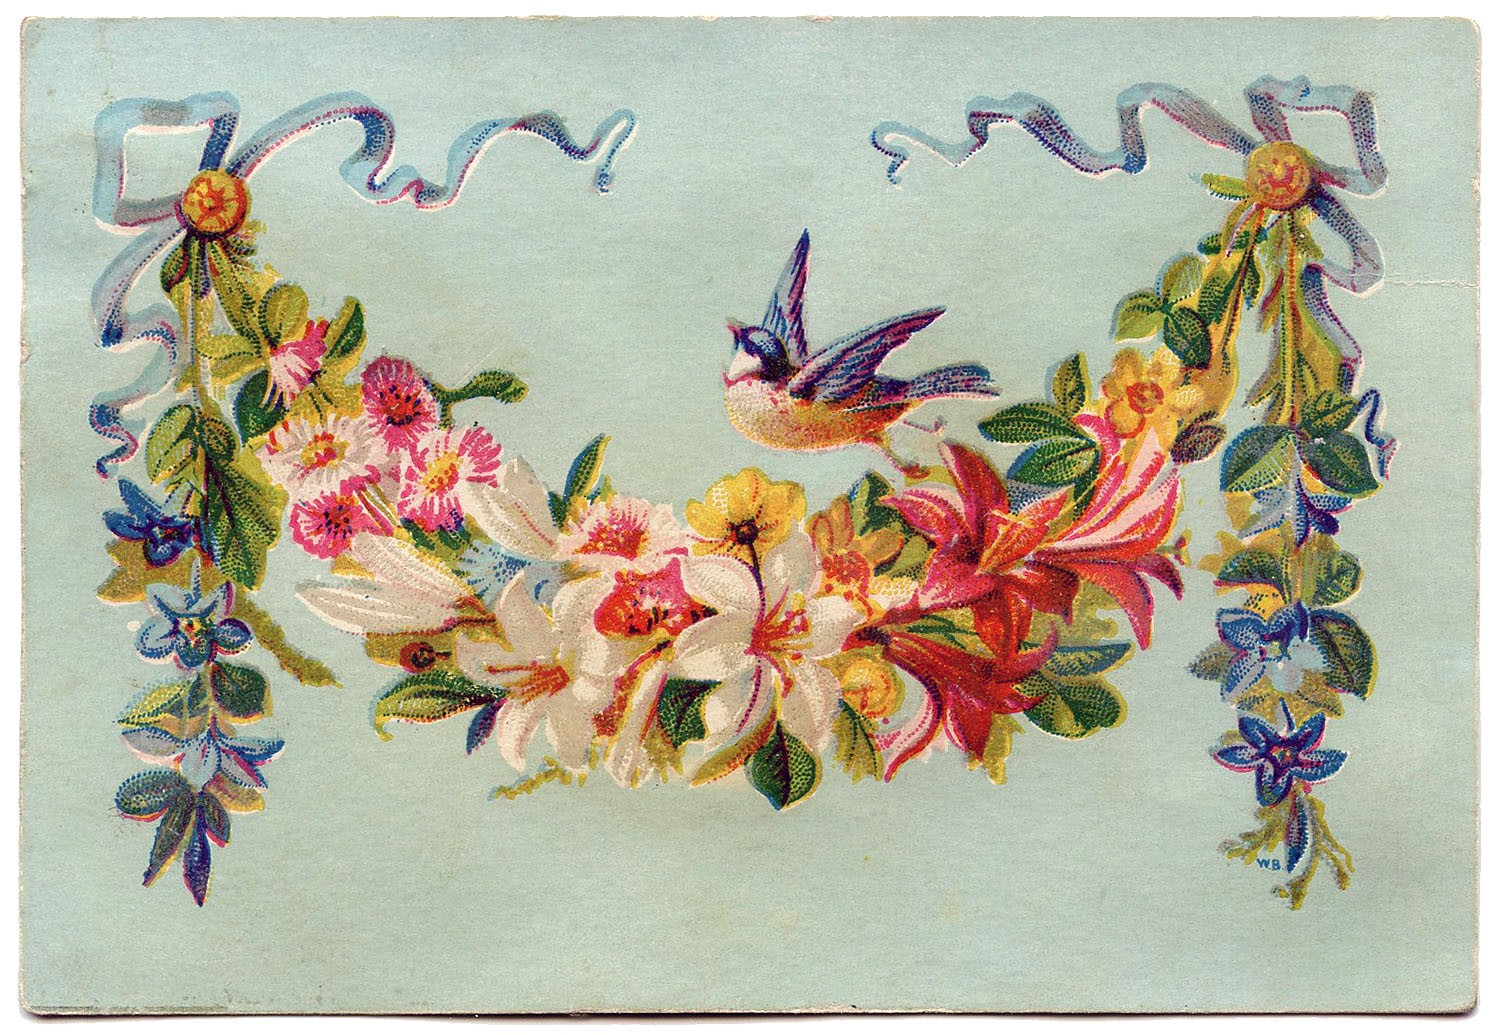 This Is A Pretty Little Card  Shown Above Is A Lovely Floral Garland